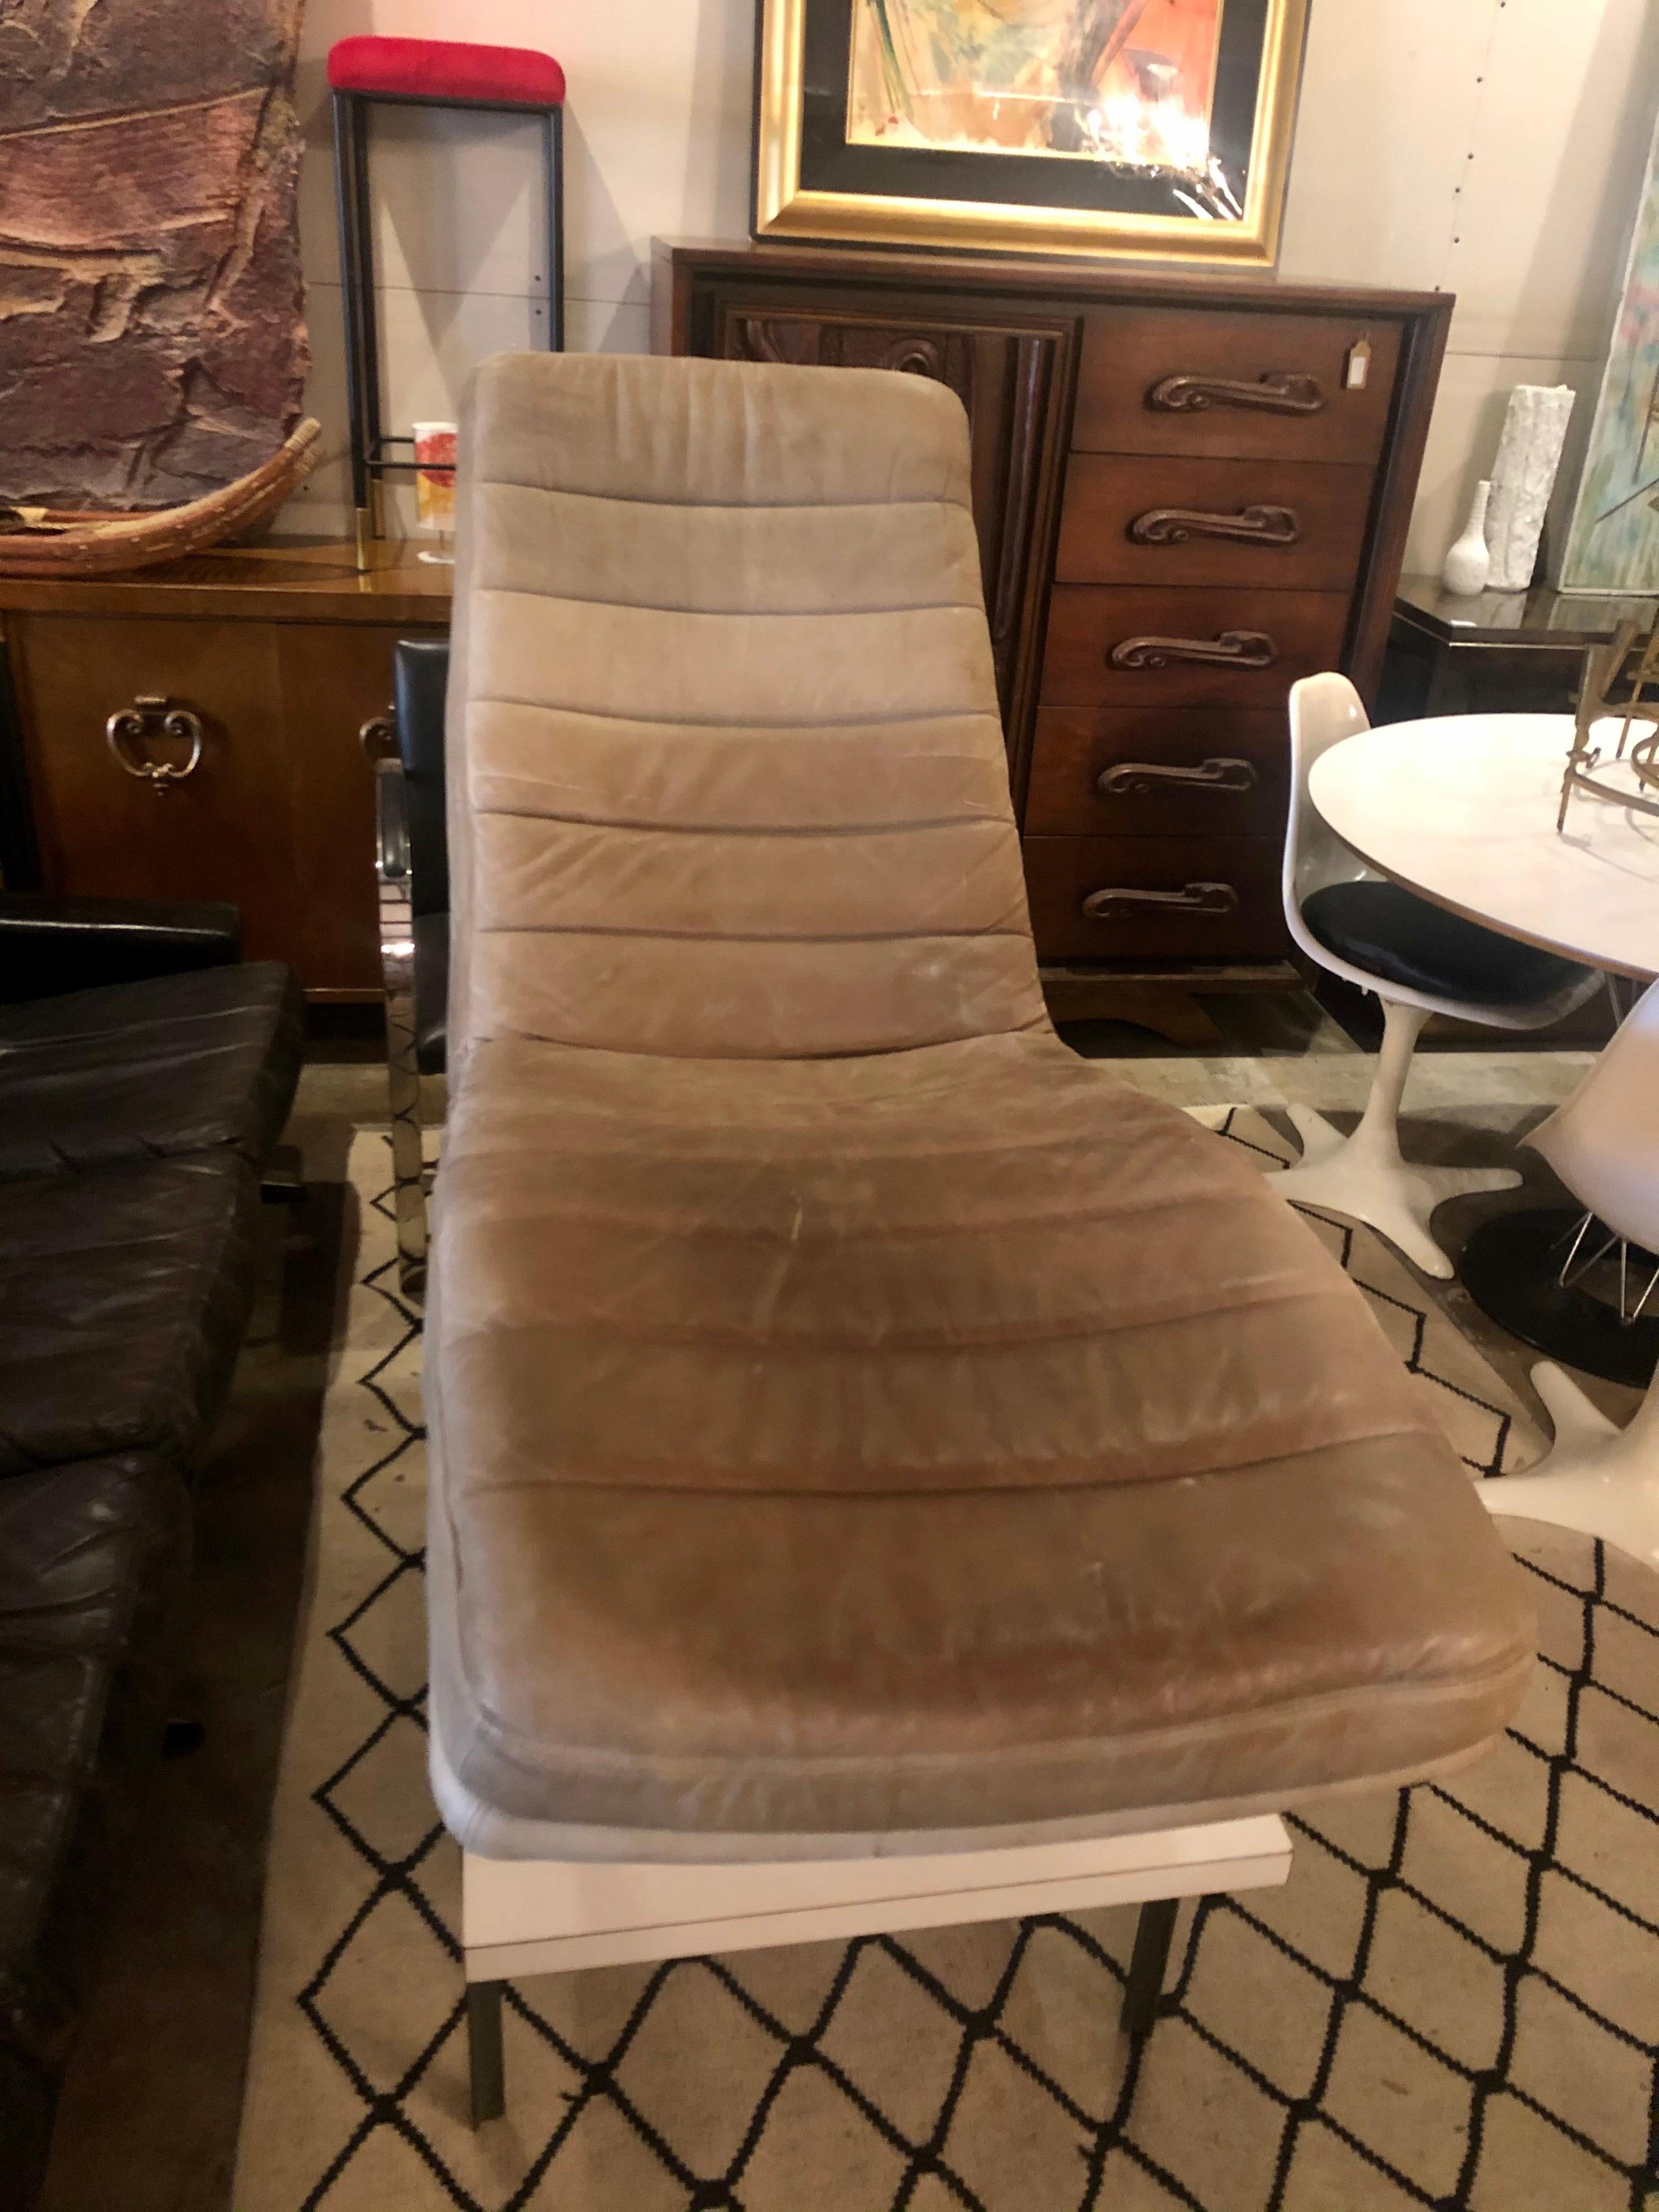 Designed by Walter Knoll for Brayton International, this chaise lounge chair is in overall good condition. Original leather. Chrome base,
circa 1970s, USA.
Dimensions:
60.5